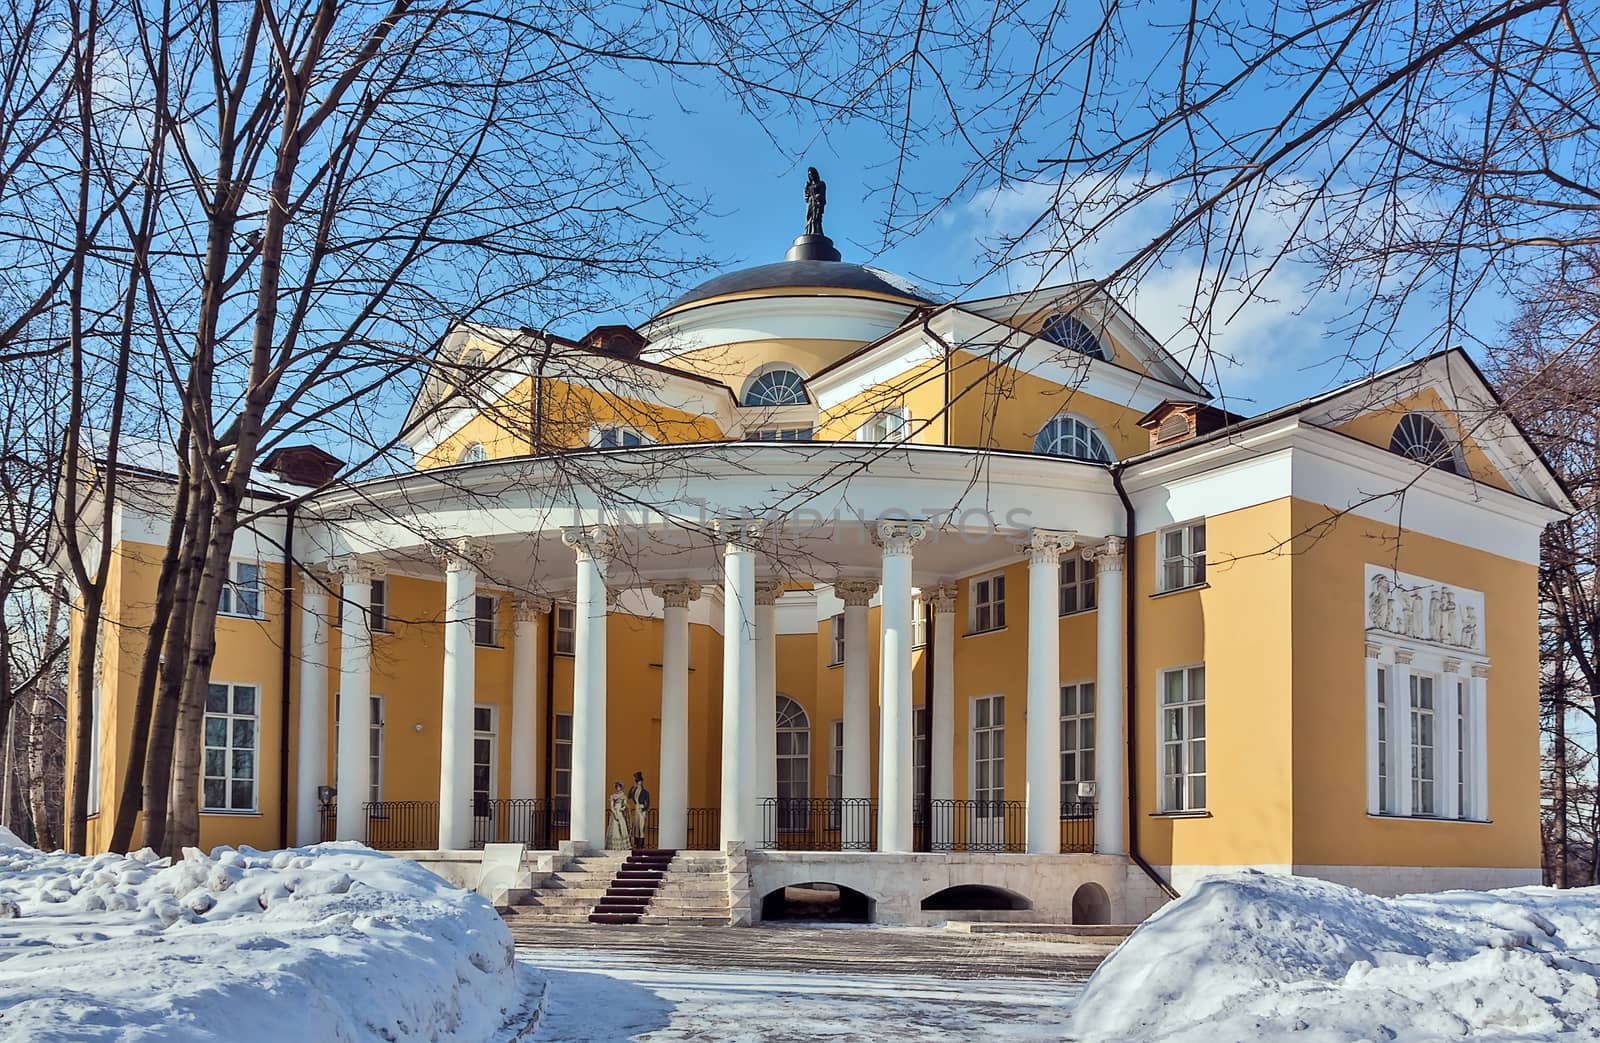 Durasov Palace in Lublino Estate in Moscow